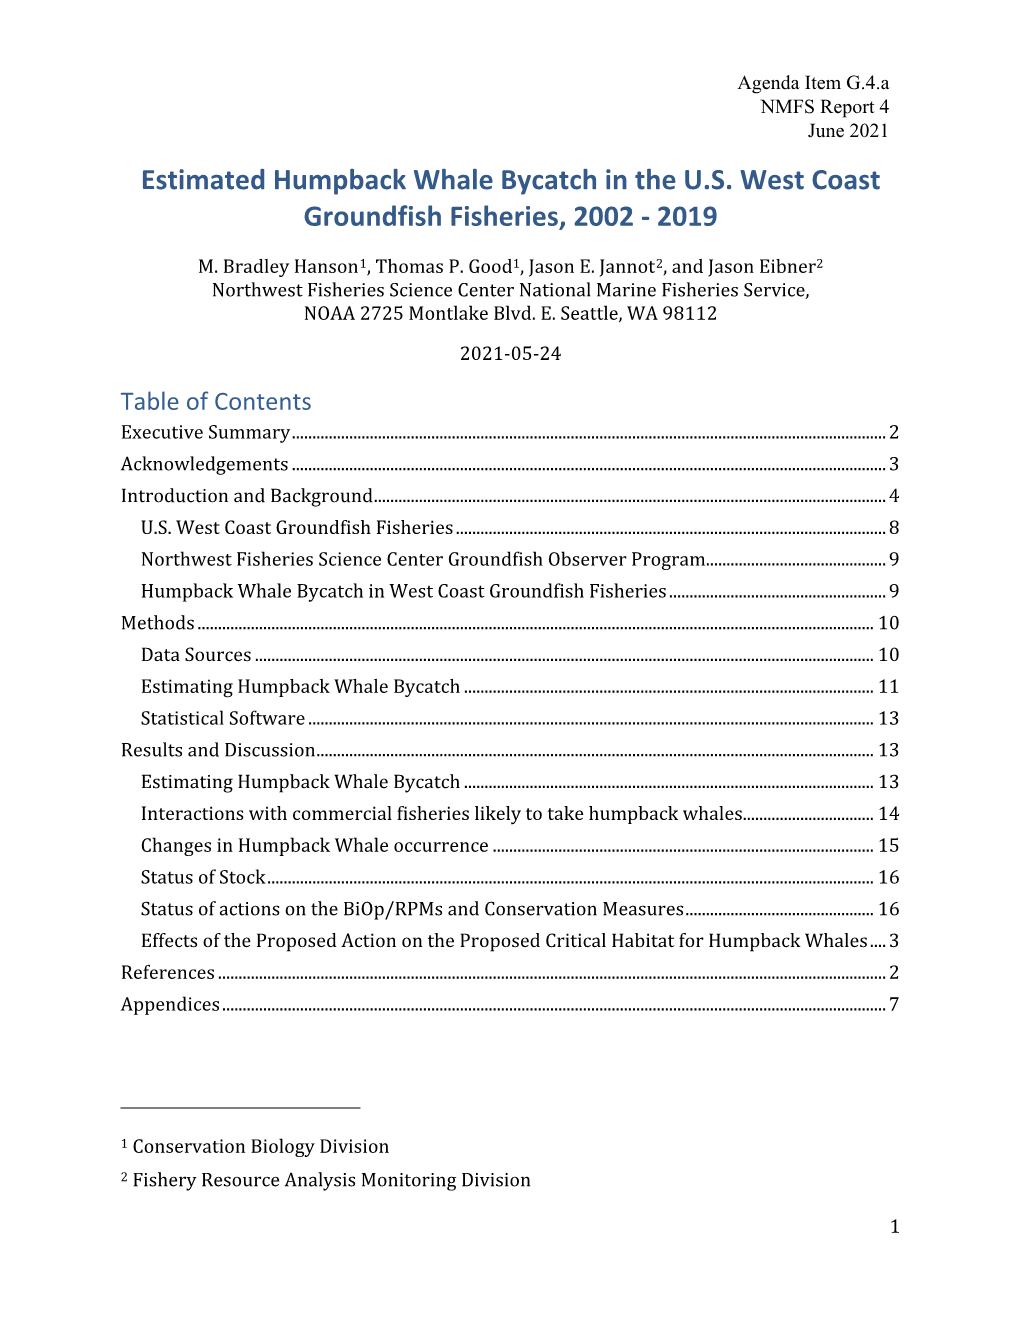 Estimated Humpback Whale Bycatch in the U.S. West Coast Groundfish Fisheries, 2002 - 2019